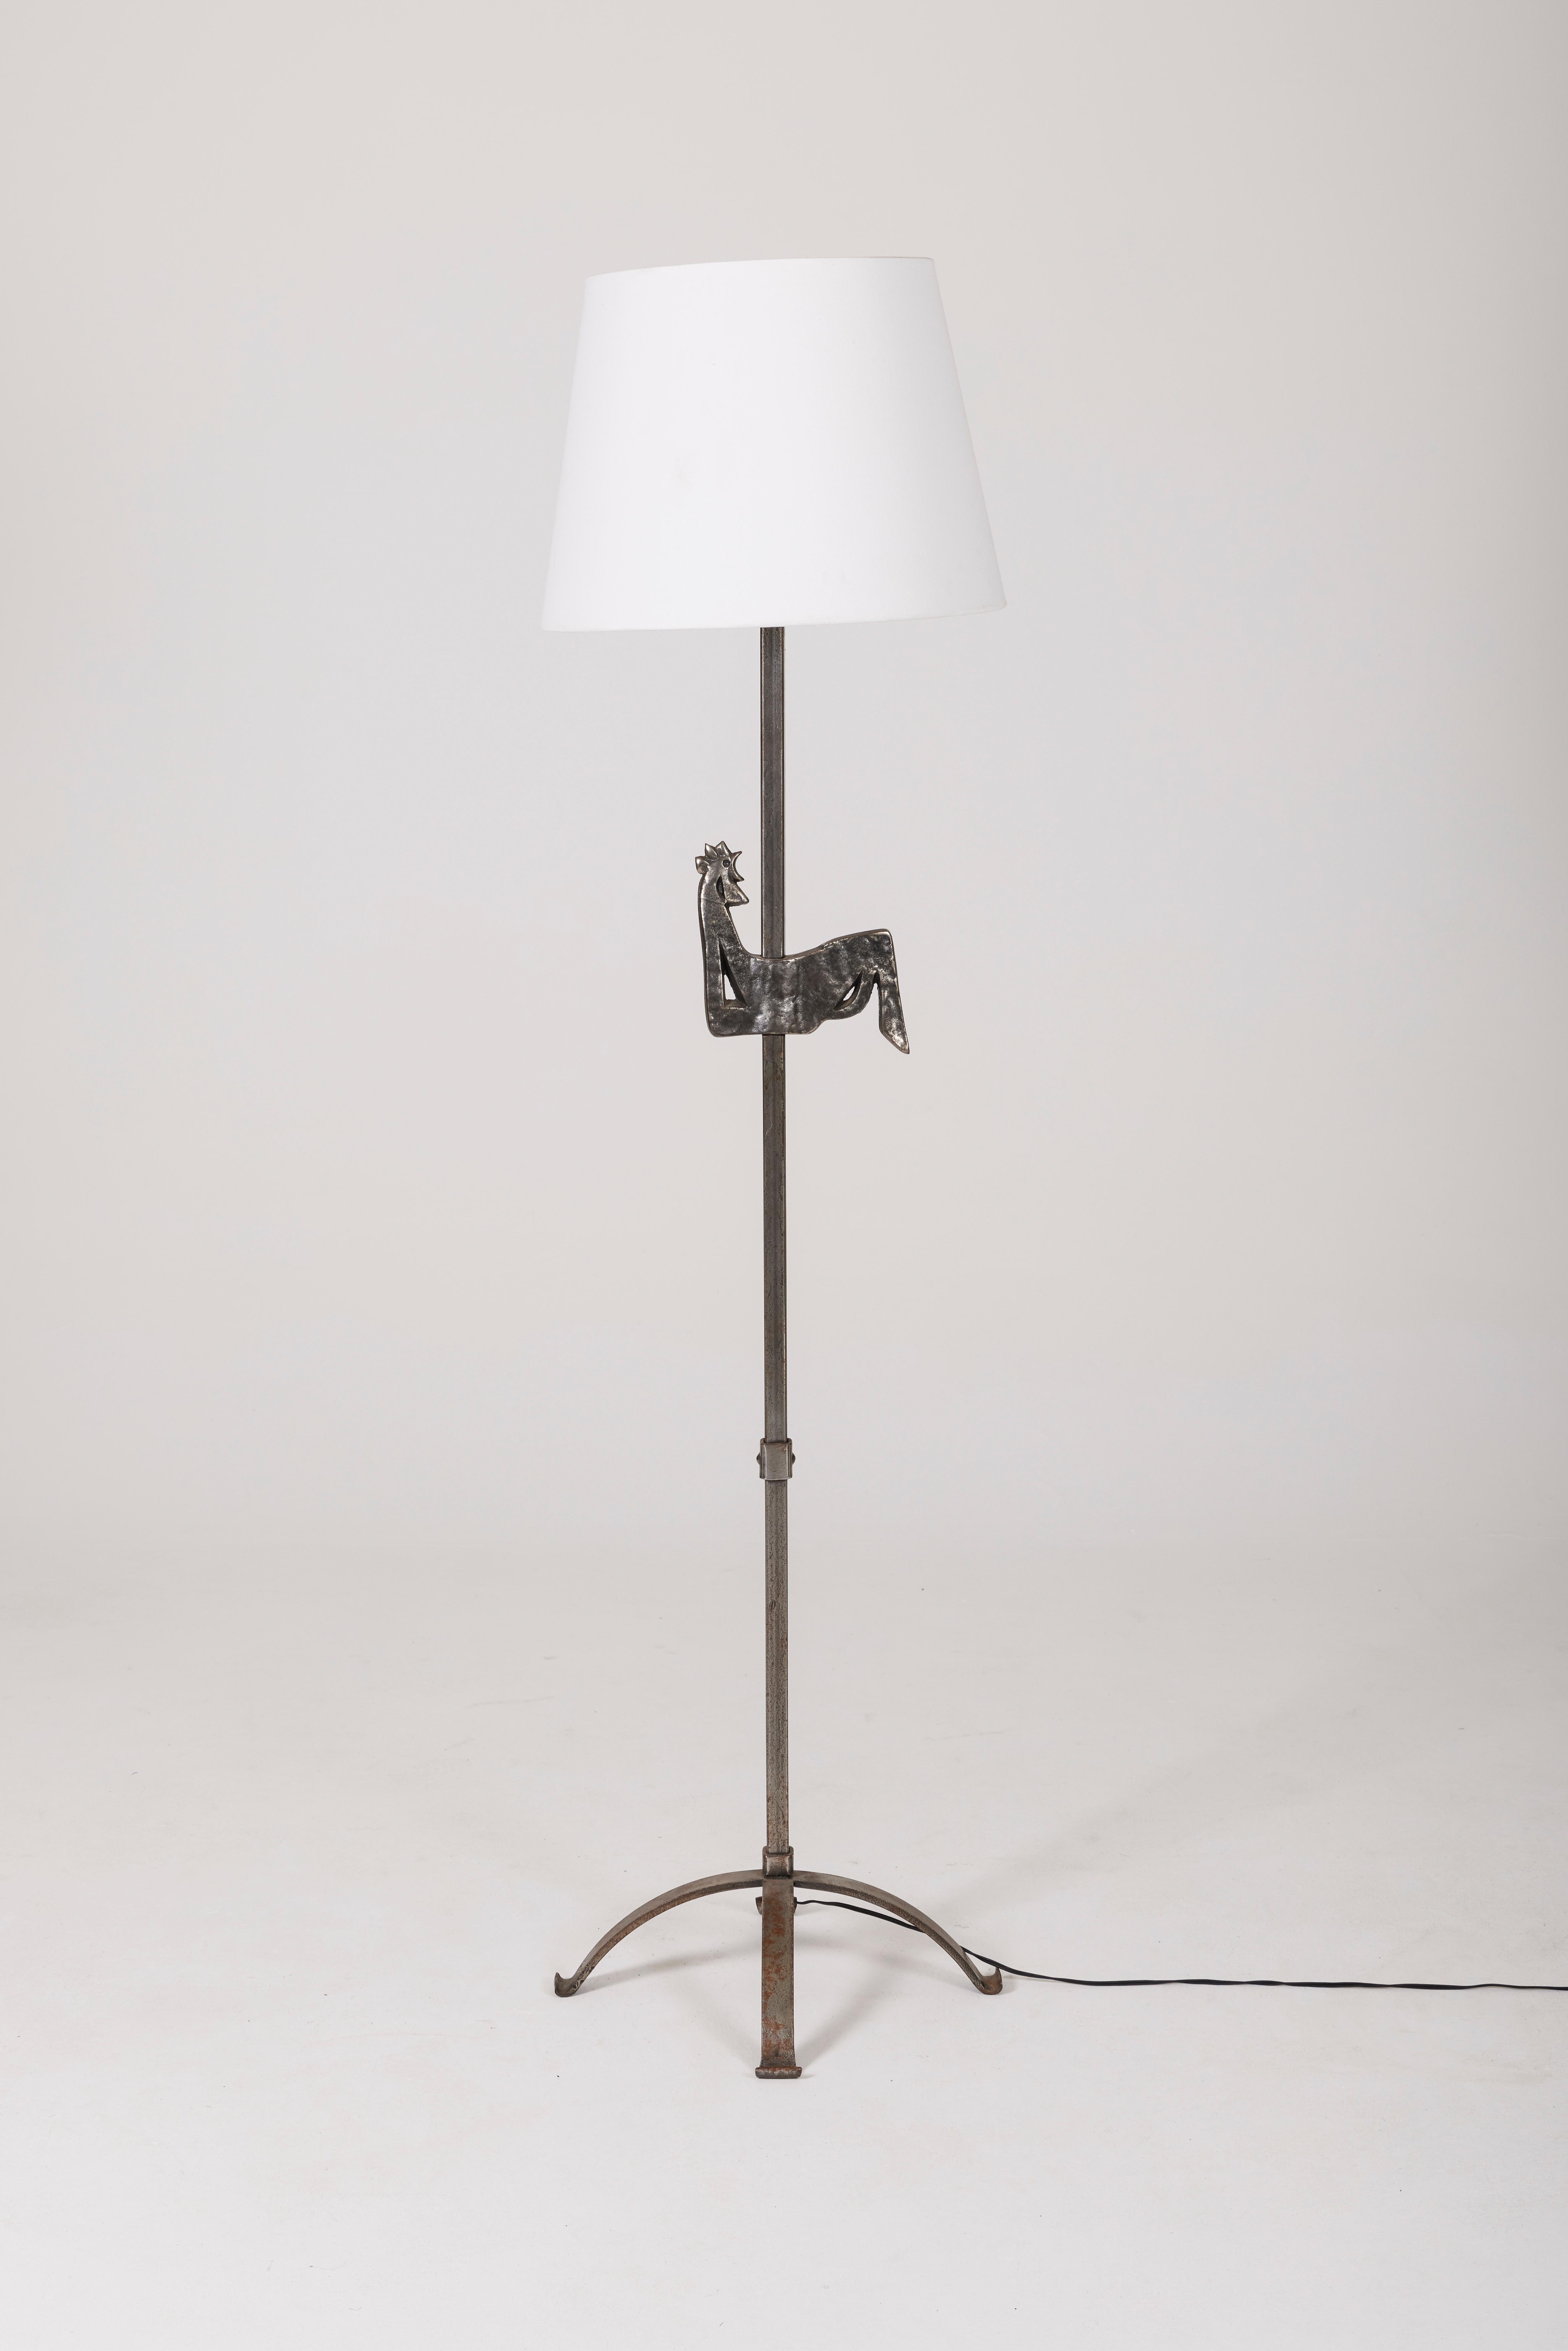 Cock floor lamp often attributed to Jean Touret for Ateliers Marolles, 1950s. Wrought iron structure resting on 4 legs. European plug. Very good condition.
LP1208